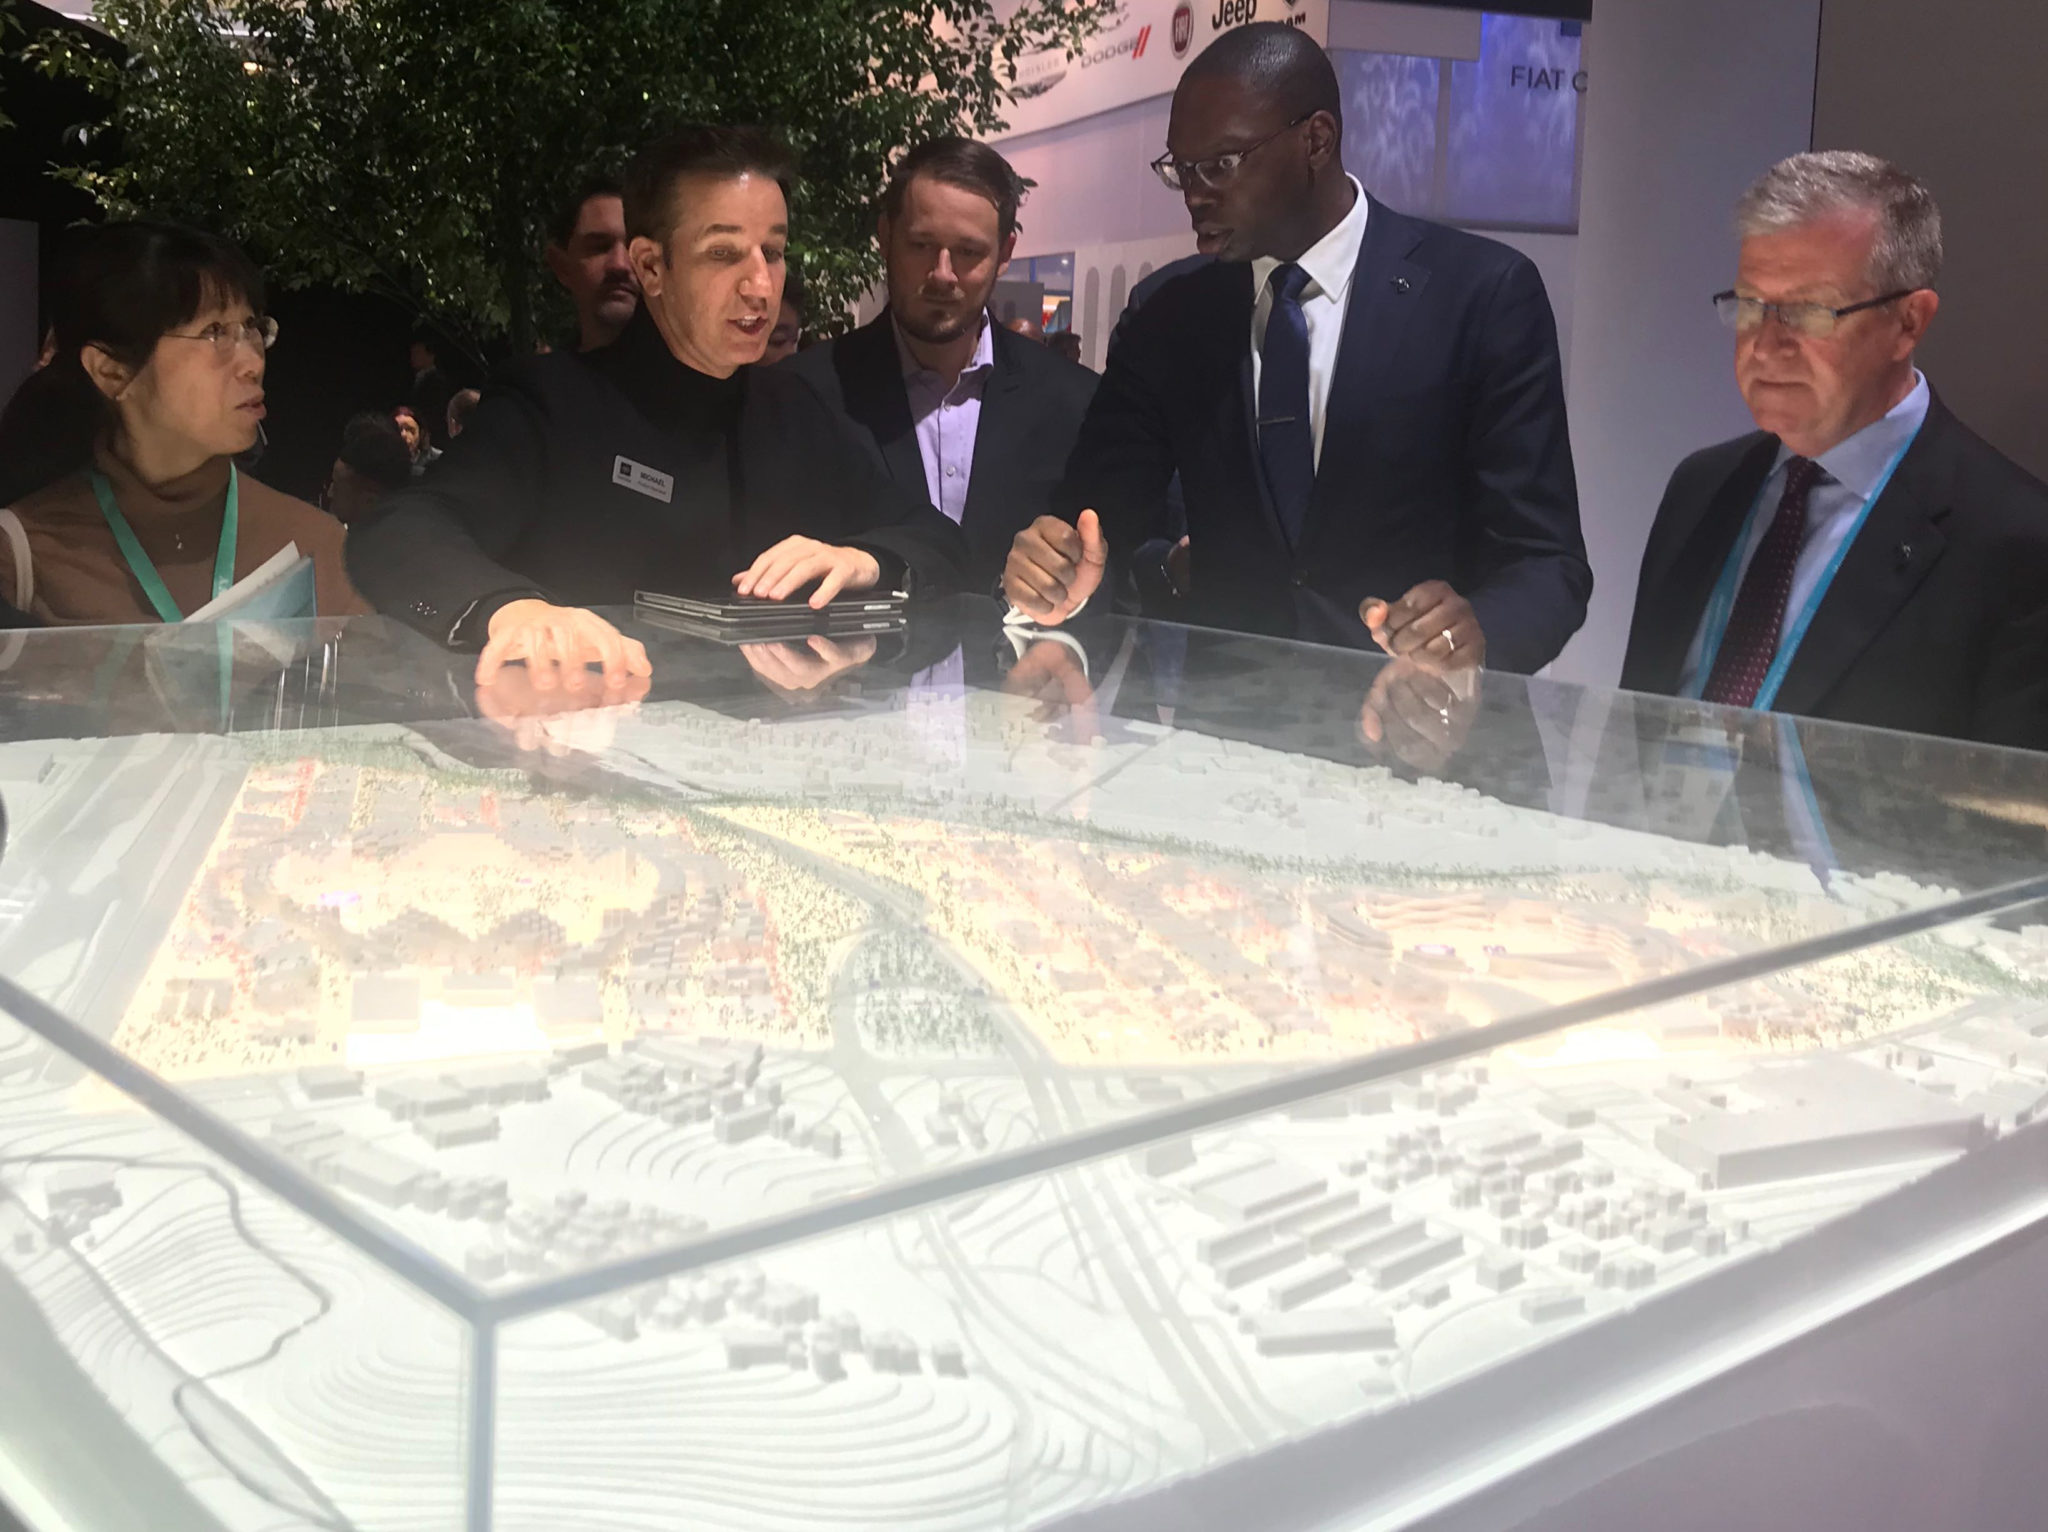 Michigan's Lieutenant Governor Garlin Gilchrist checks out Toyota's Woven City at CES 2020